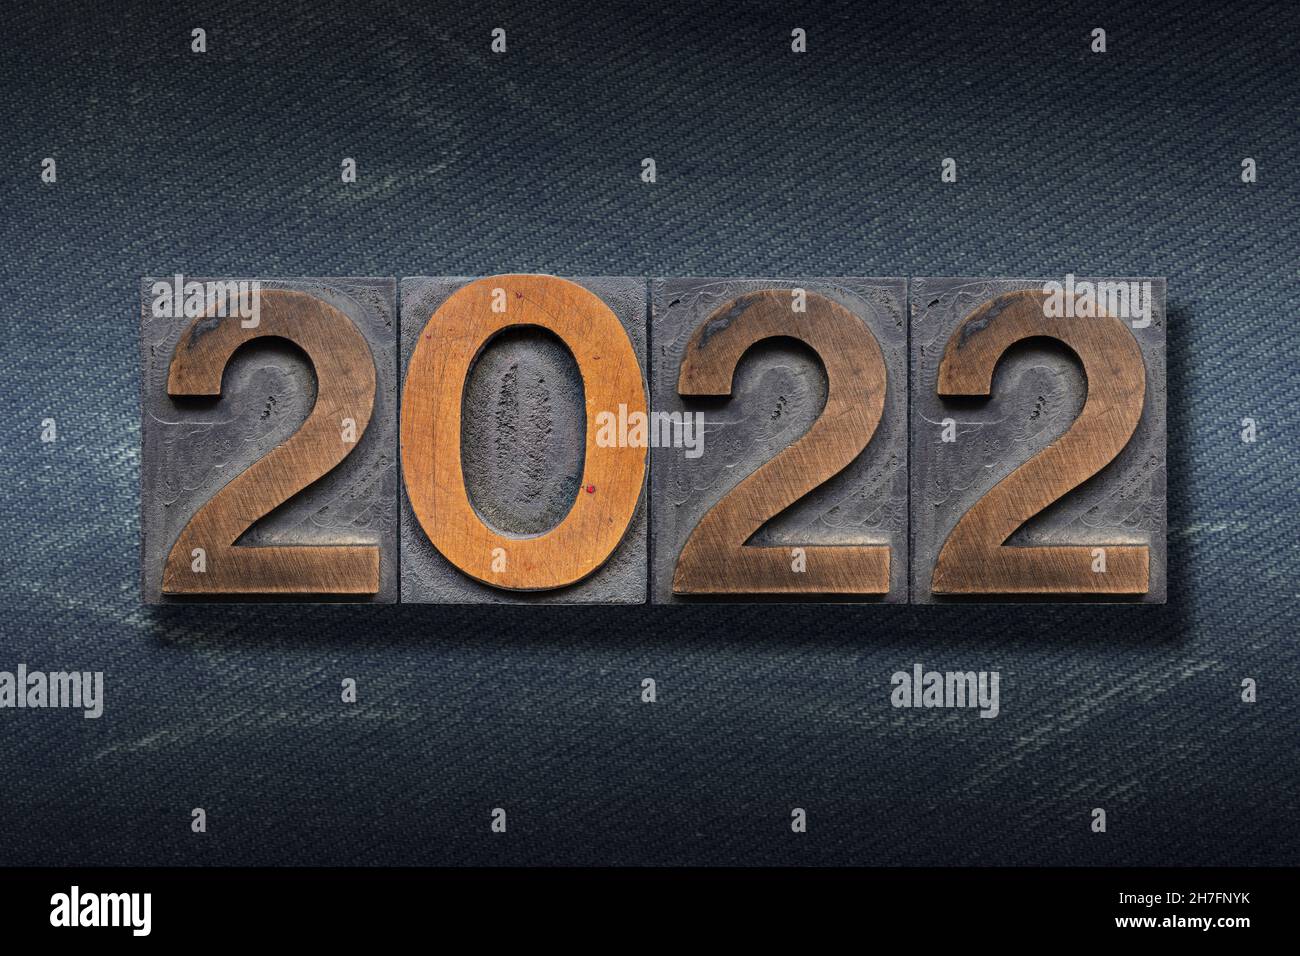 numbers 2022 made from wooden letterpress on dark jeans background Stock Photo